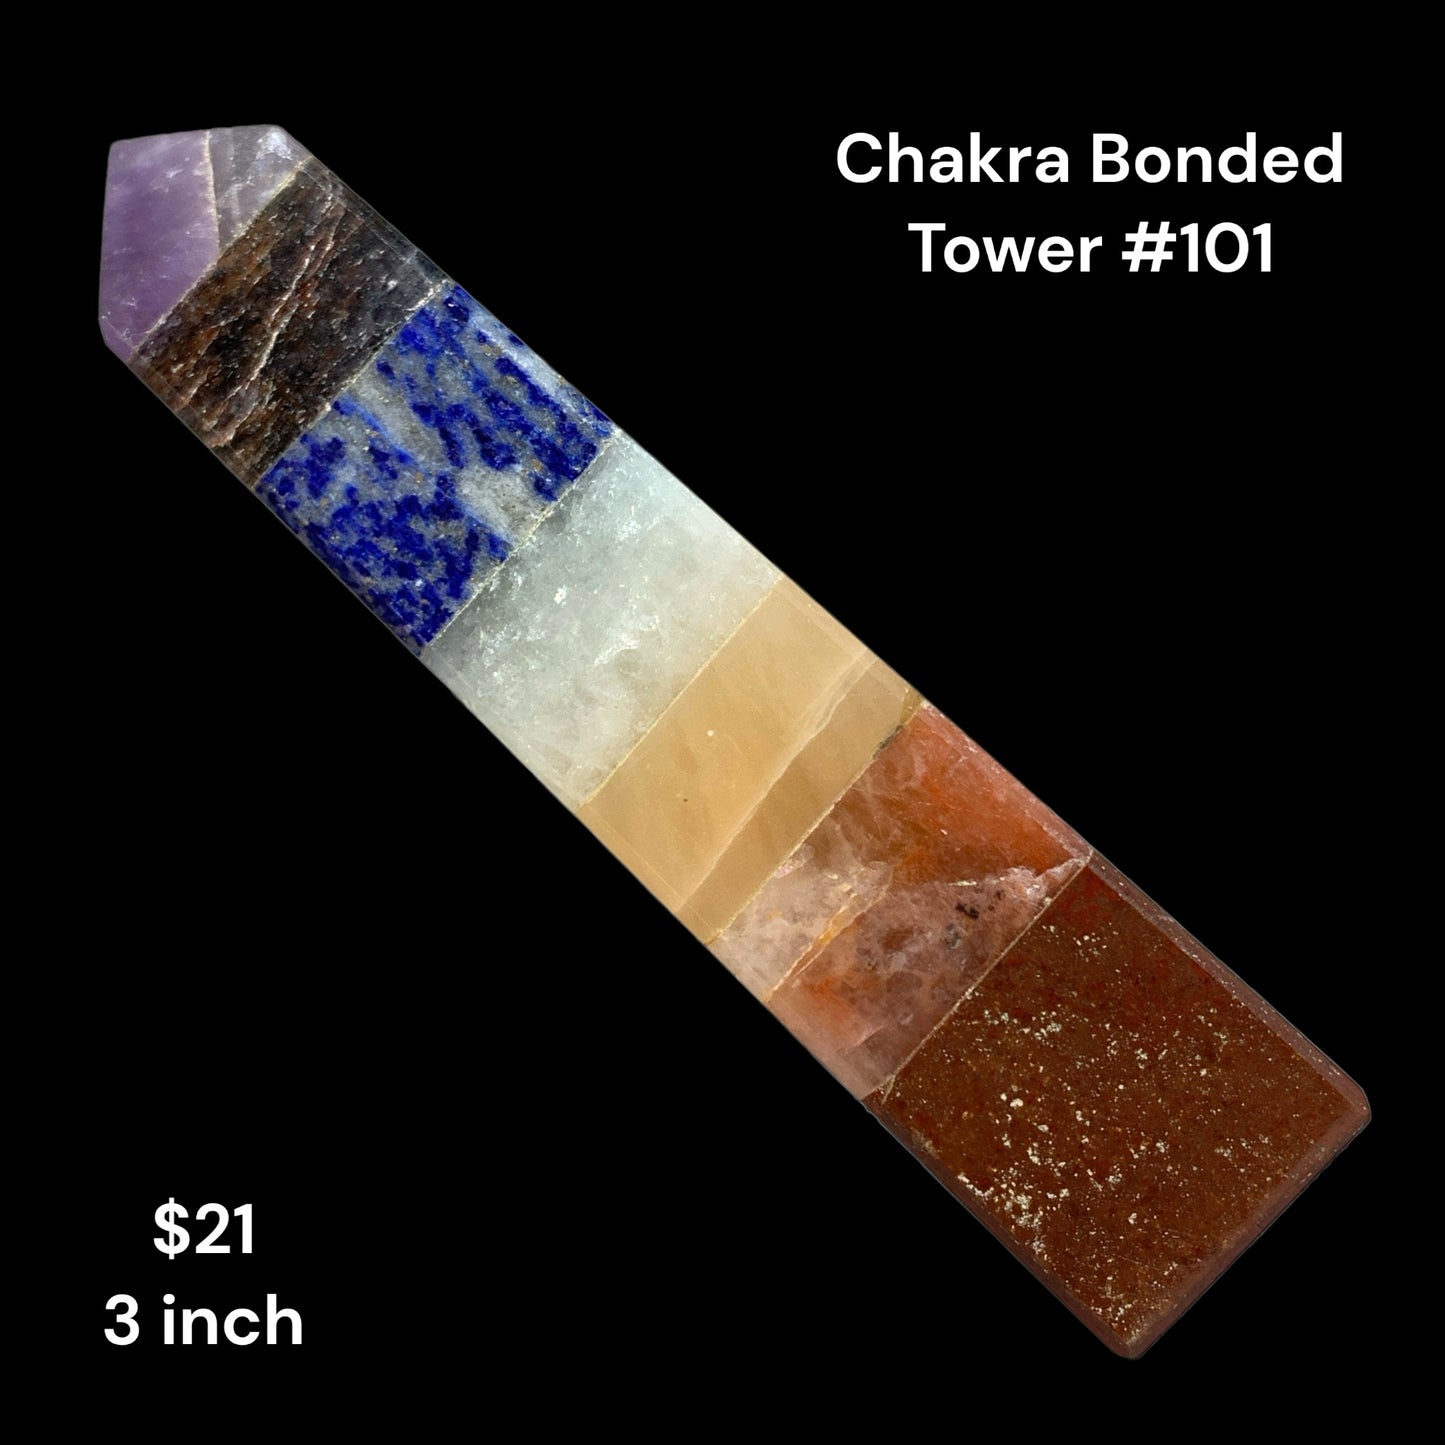 Chakra Bonded - 3 inch - Polished Towers